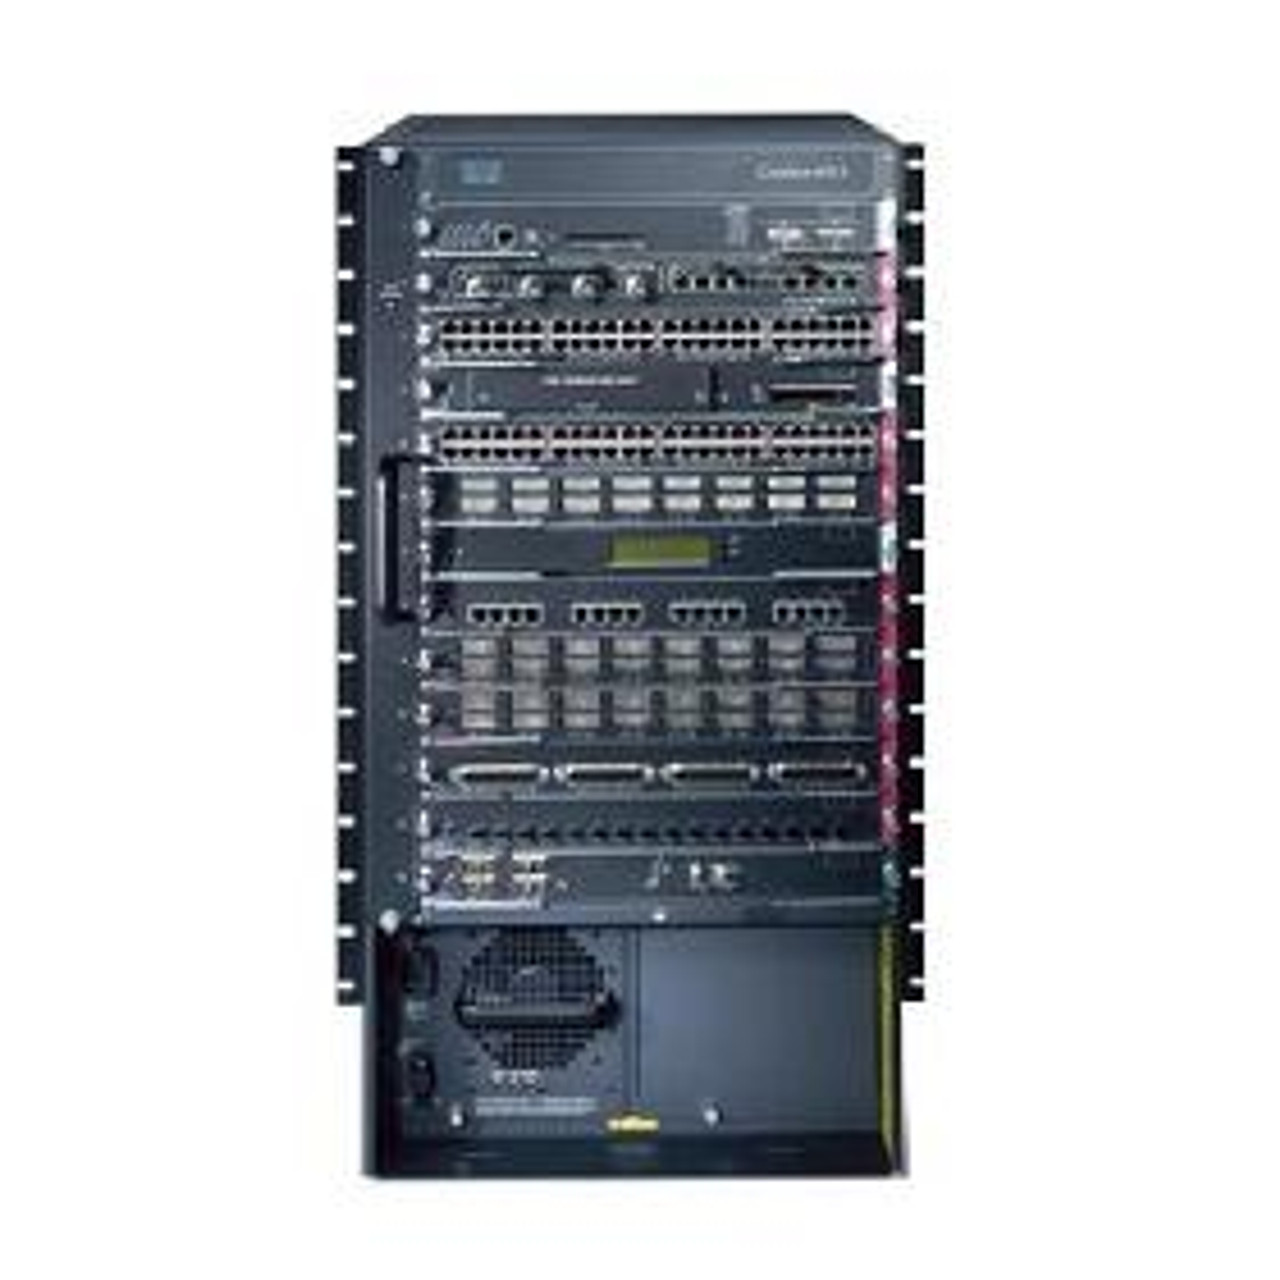 Cisco Catalyst switch 6513 Firewall Security System Rack-mountable